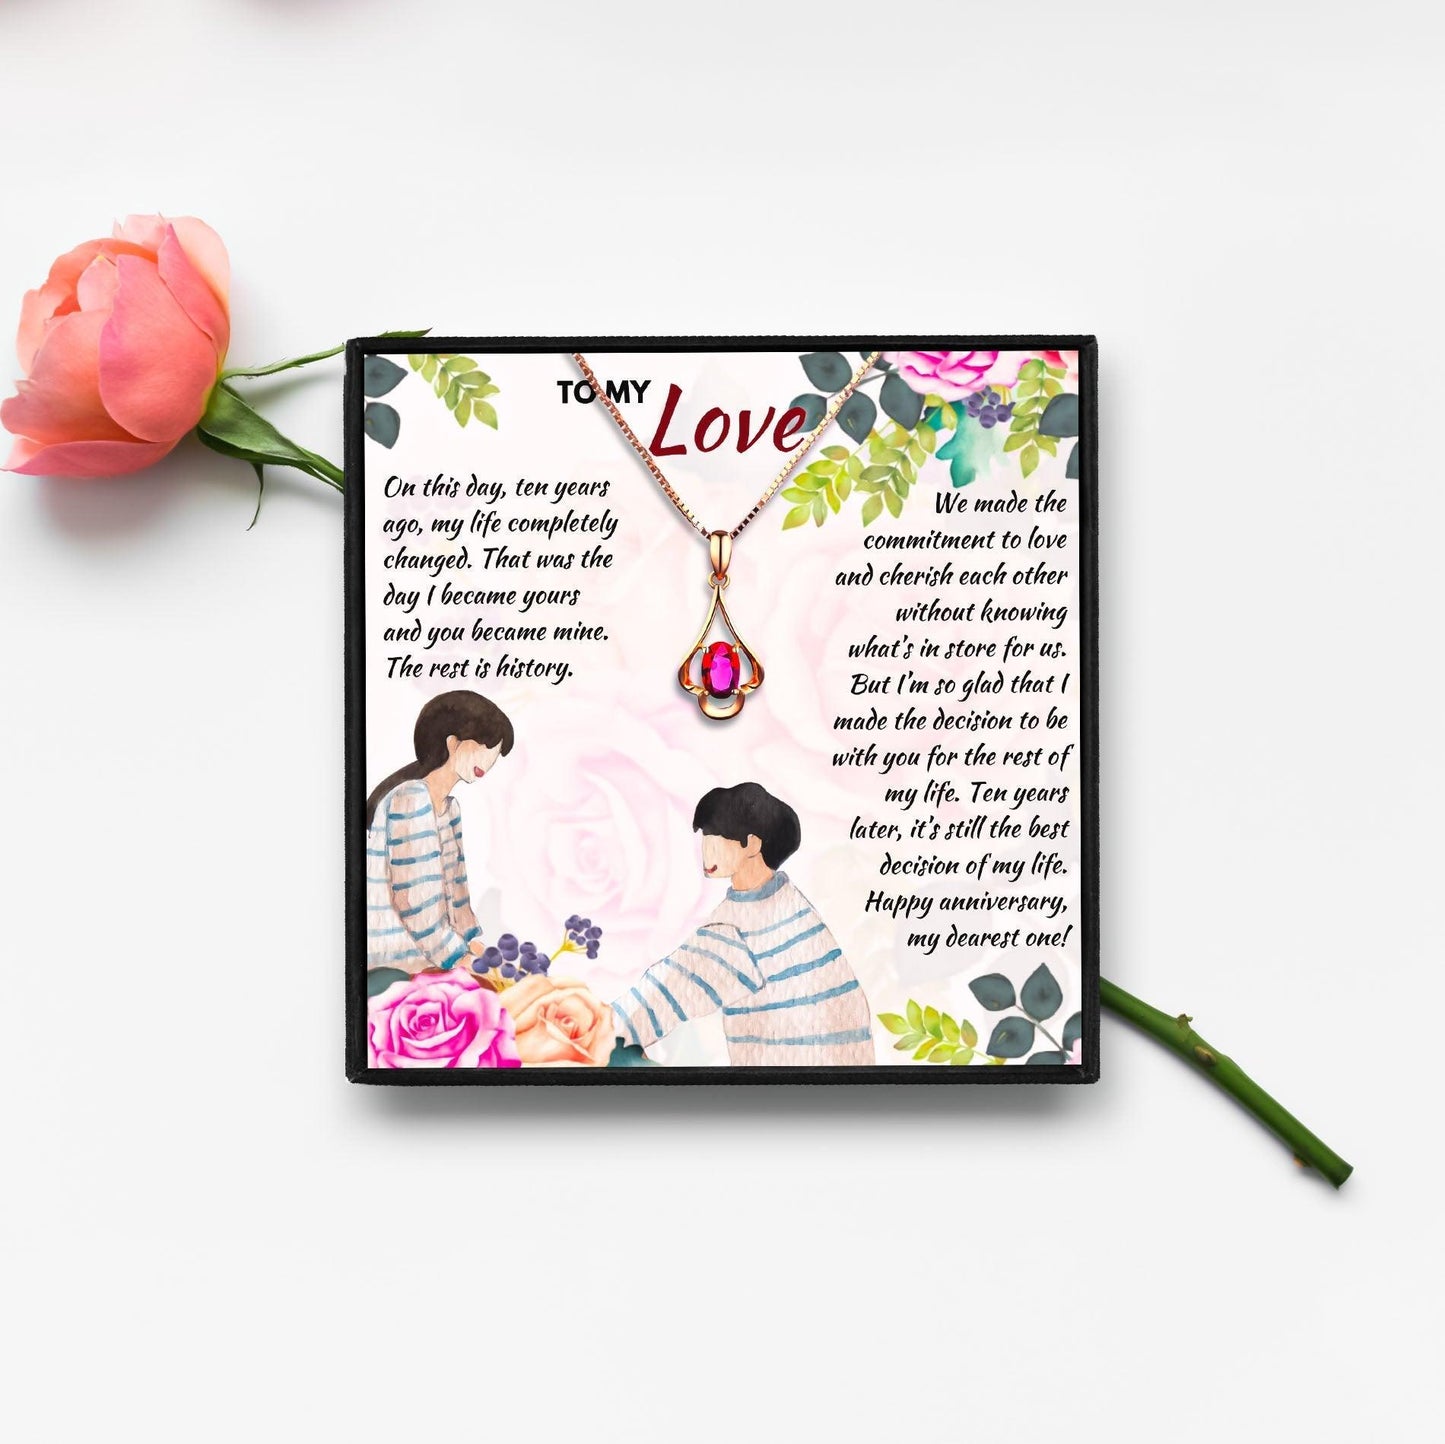 10 Year Wedding Anniversary Gift For Her in 2023 | 10 Year Wedding Anniversary Gift For Her - undefined | 10 wedding anniversary gifts for wife, 10 year anniversary gift for her, Anniversary Gifts, ten year anniversary, tenth anniversary gift | From Hunny Life | hunnylife.com